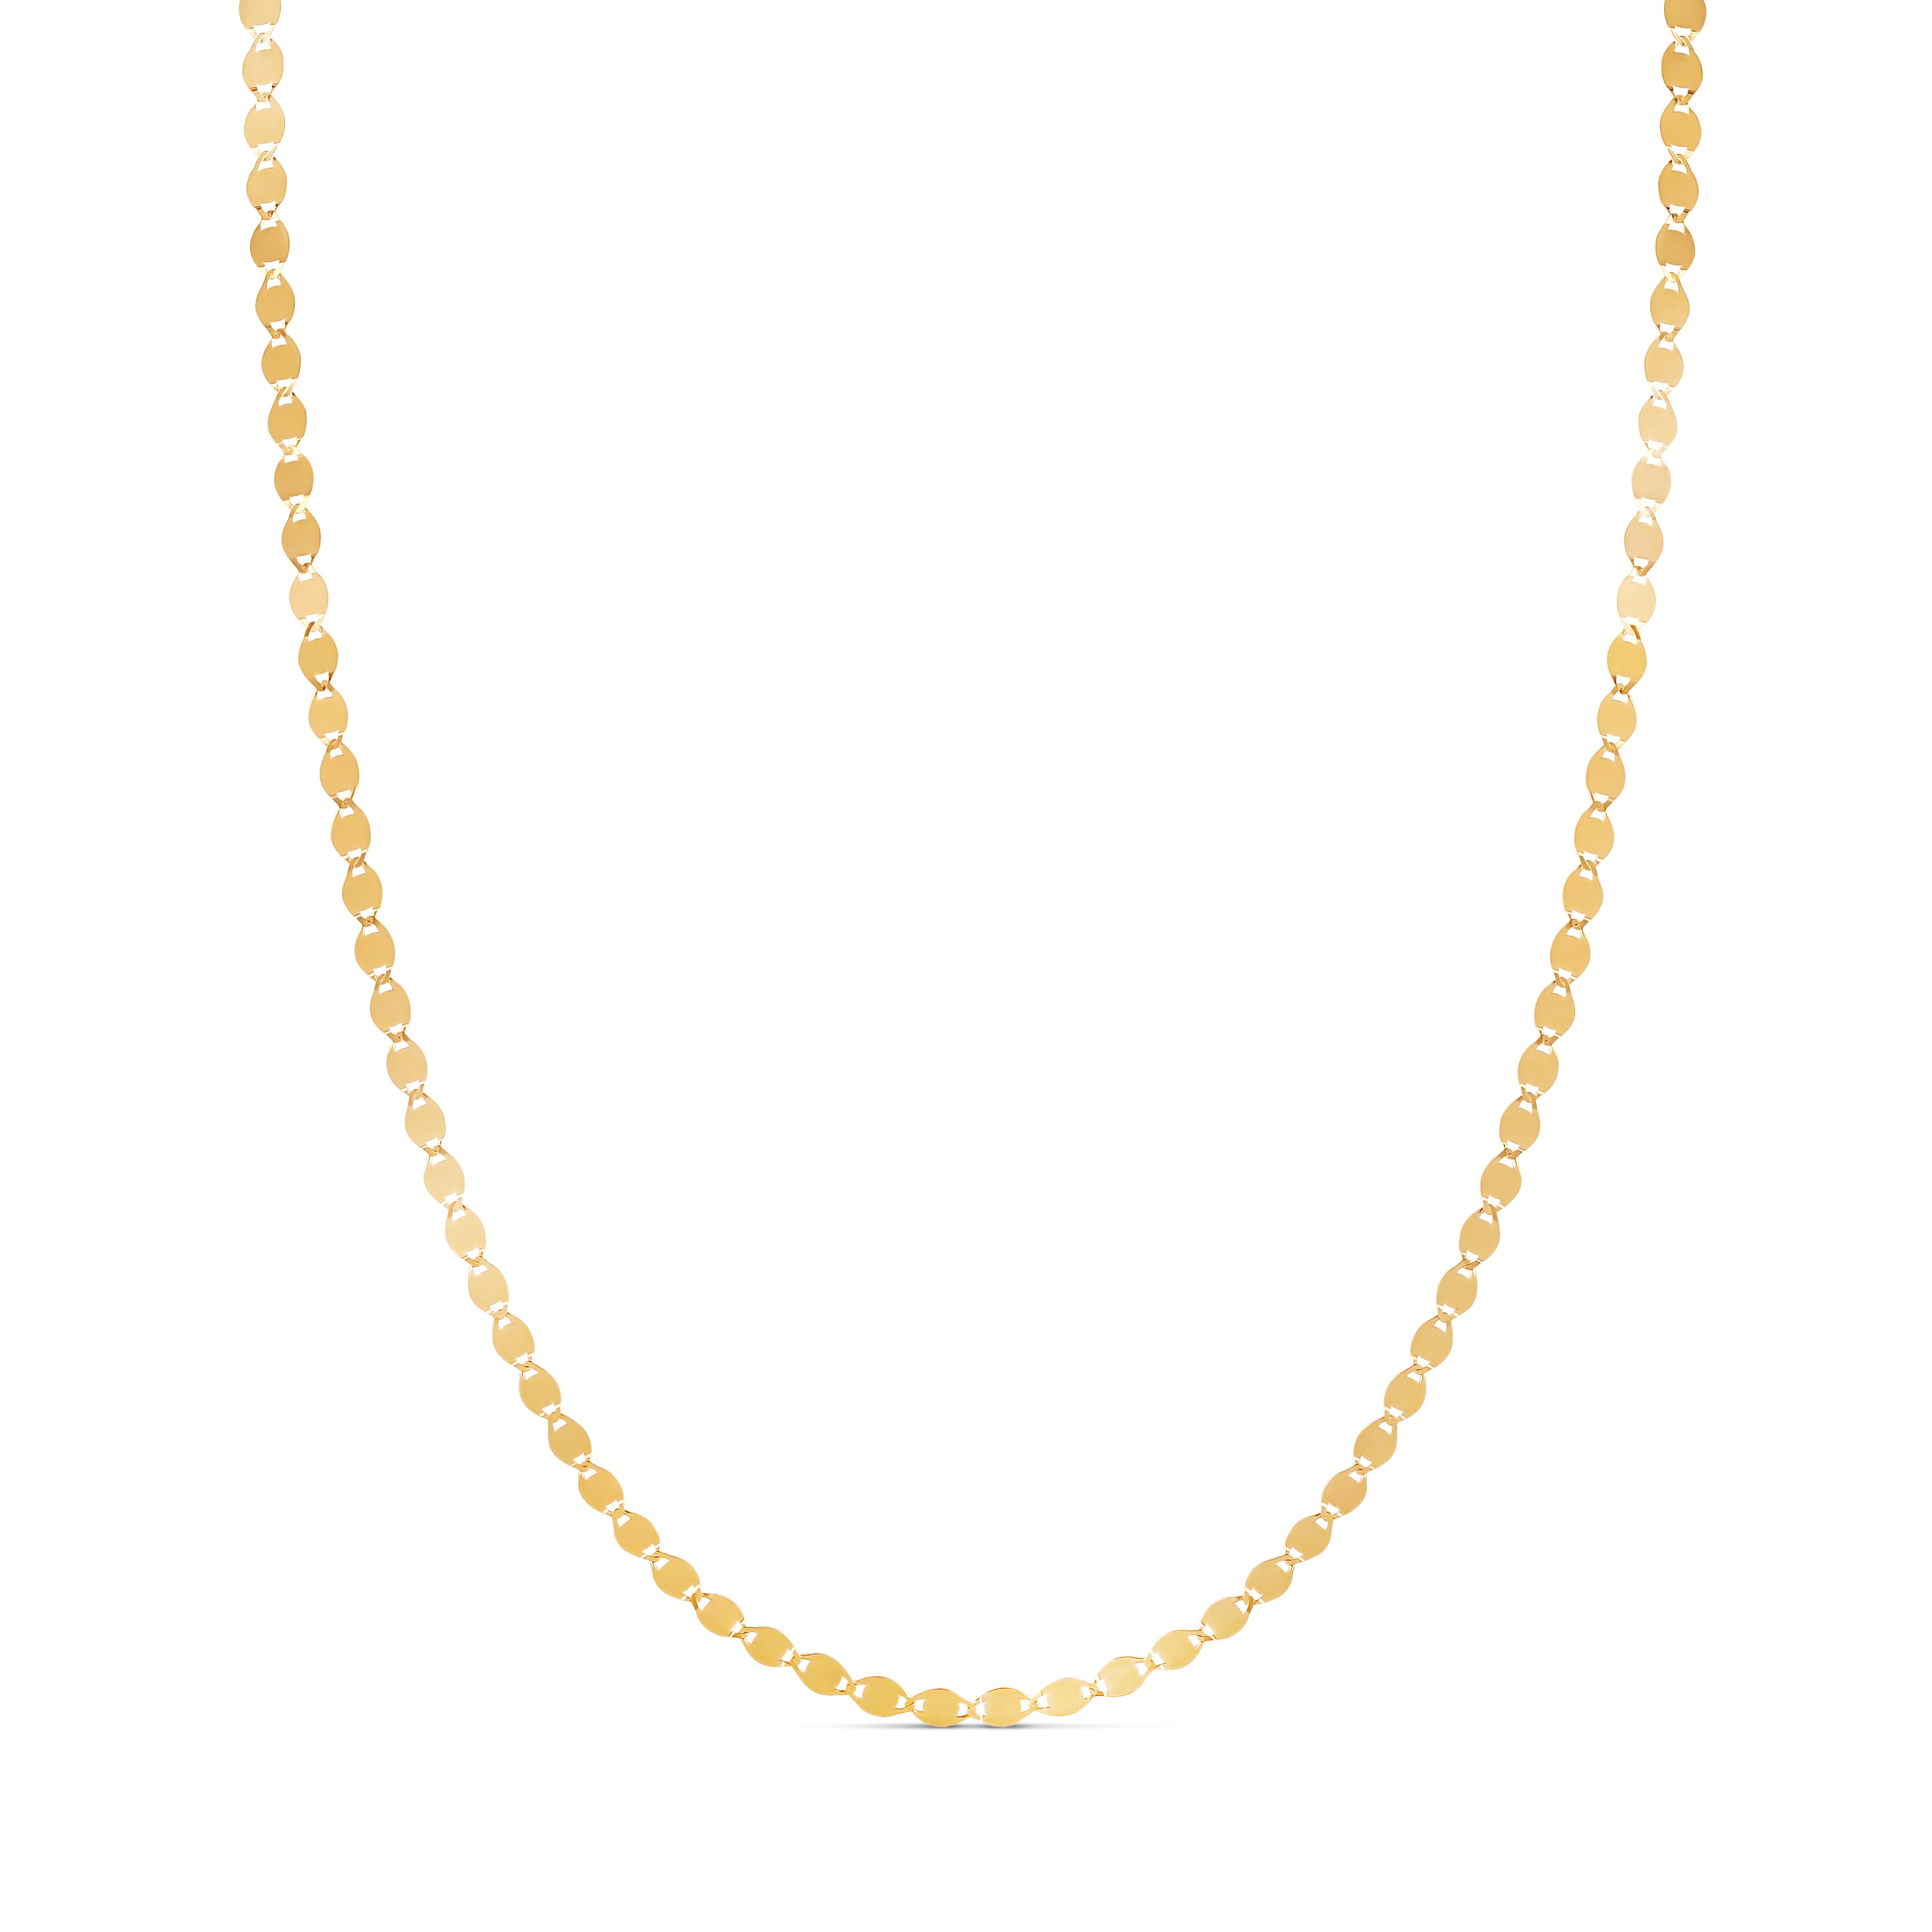 Oval Mirrored Chain Necklace